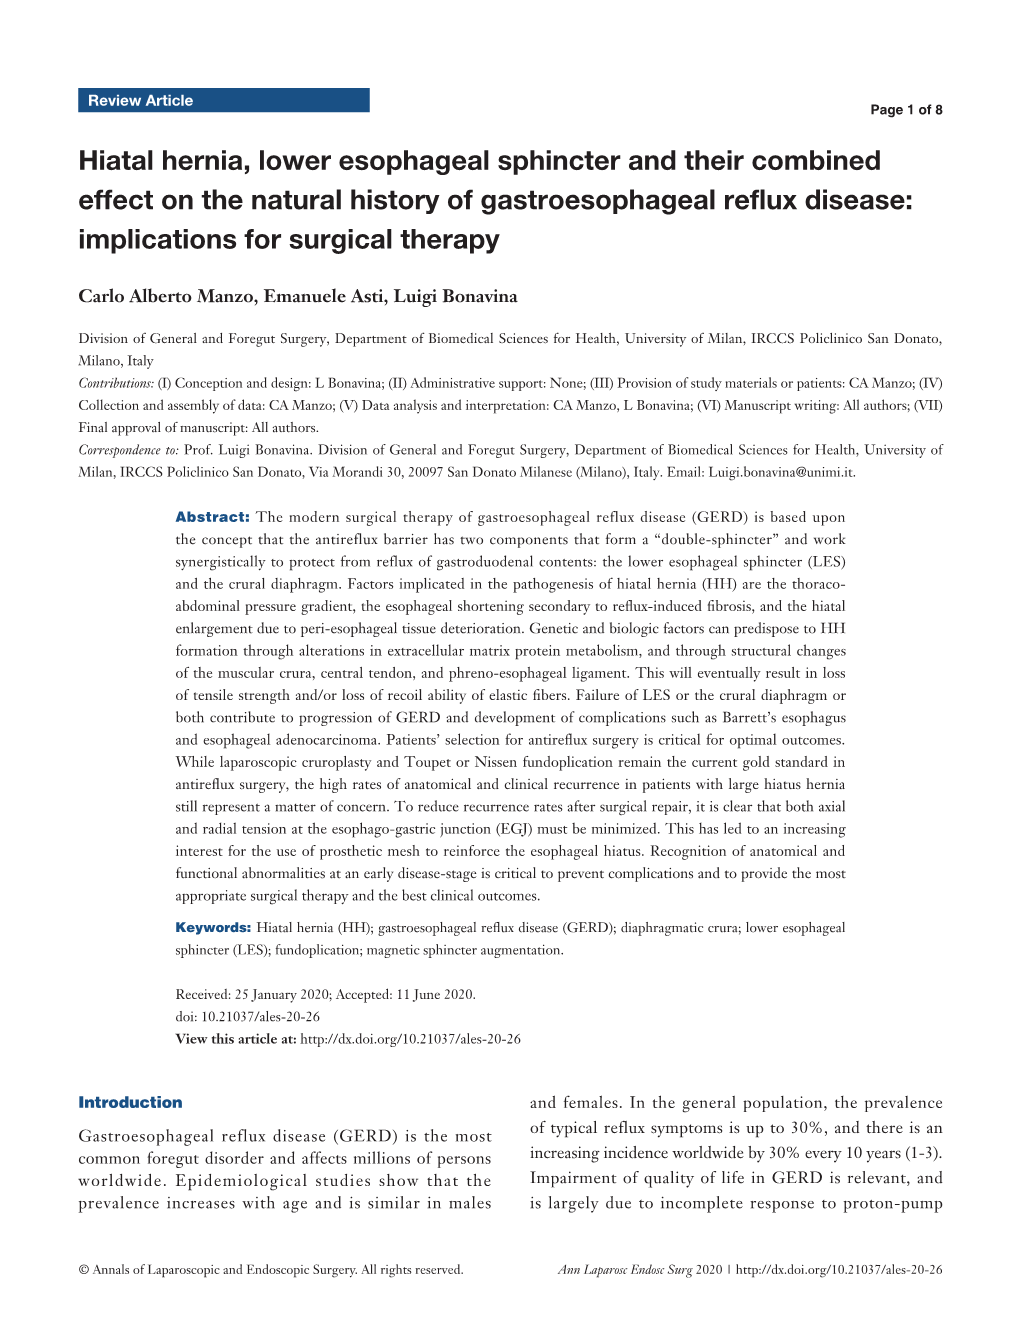 Hiatal Hernia, Lower Esophageal Sphincter and Their Combined Effect on the Natural History of Gastroesophageal Reflux Disease: Implications for Surgical Therapy